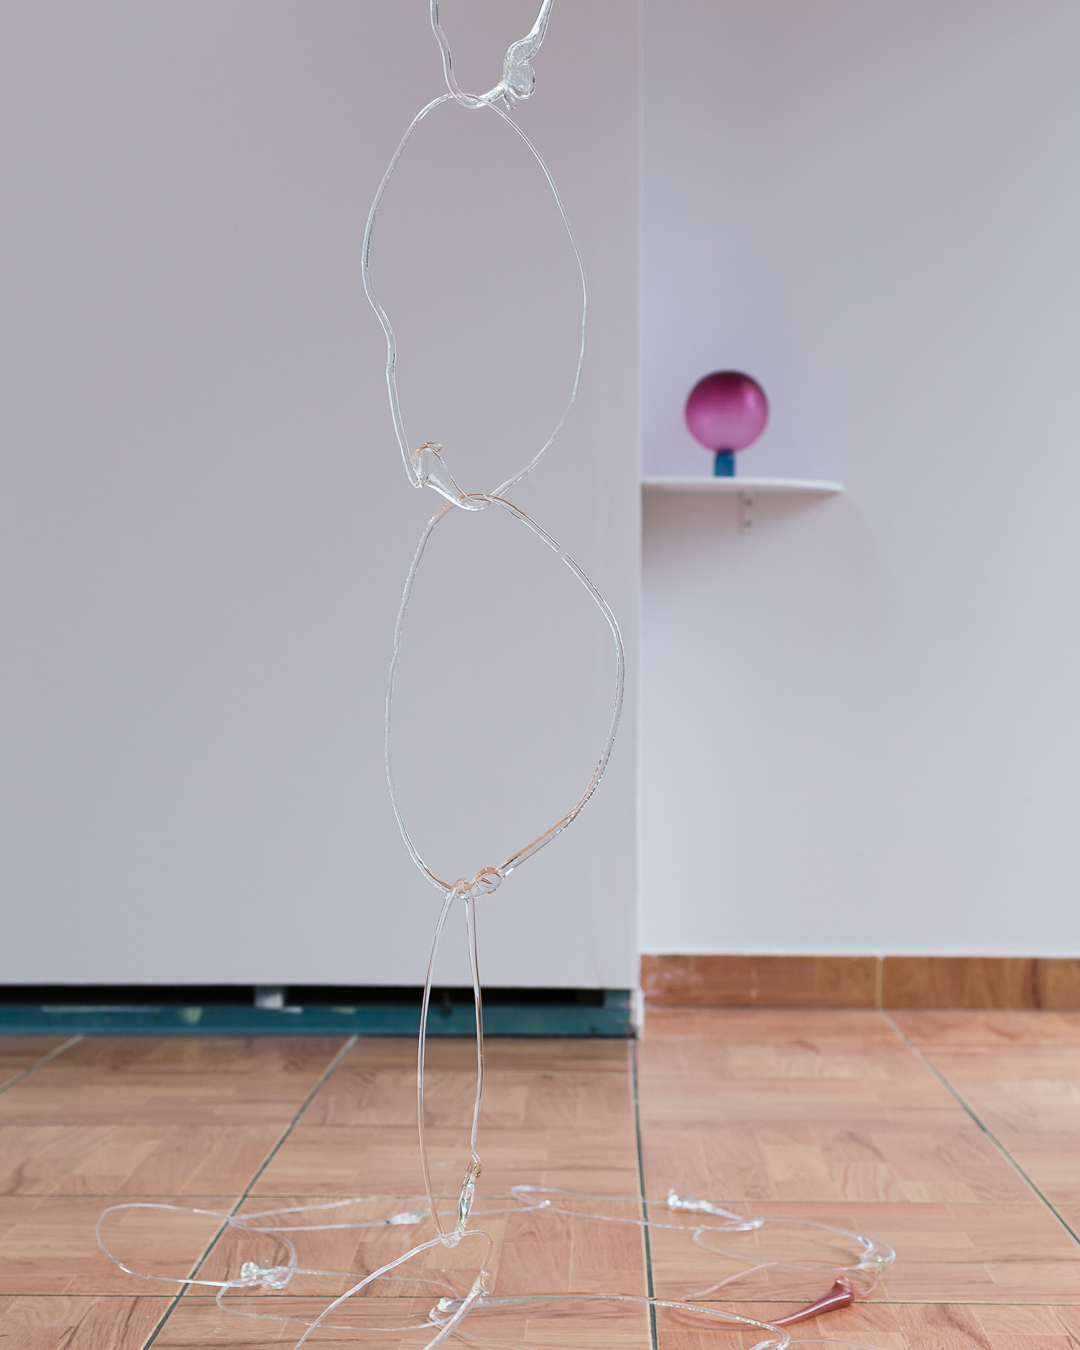 Sally Craven, <em>circuit breaker</em>, 2021-2022, kiln-formed glass chain, diamente chain hanging height 3 metres, Pari. Photographer: Document Photography; Louis Grant, I lay in silence, but silence talks, 2021, blown and cold worked glass, glue, 20x13x13cm, Pari. Photographer: Document Photography.